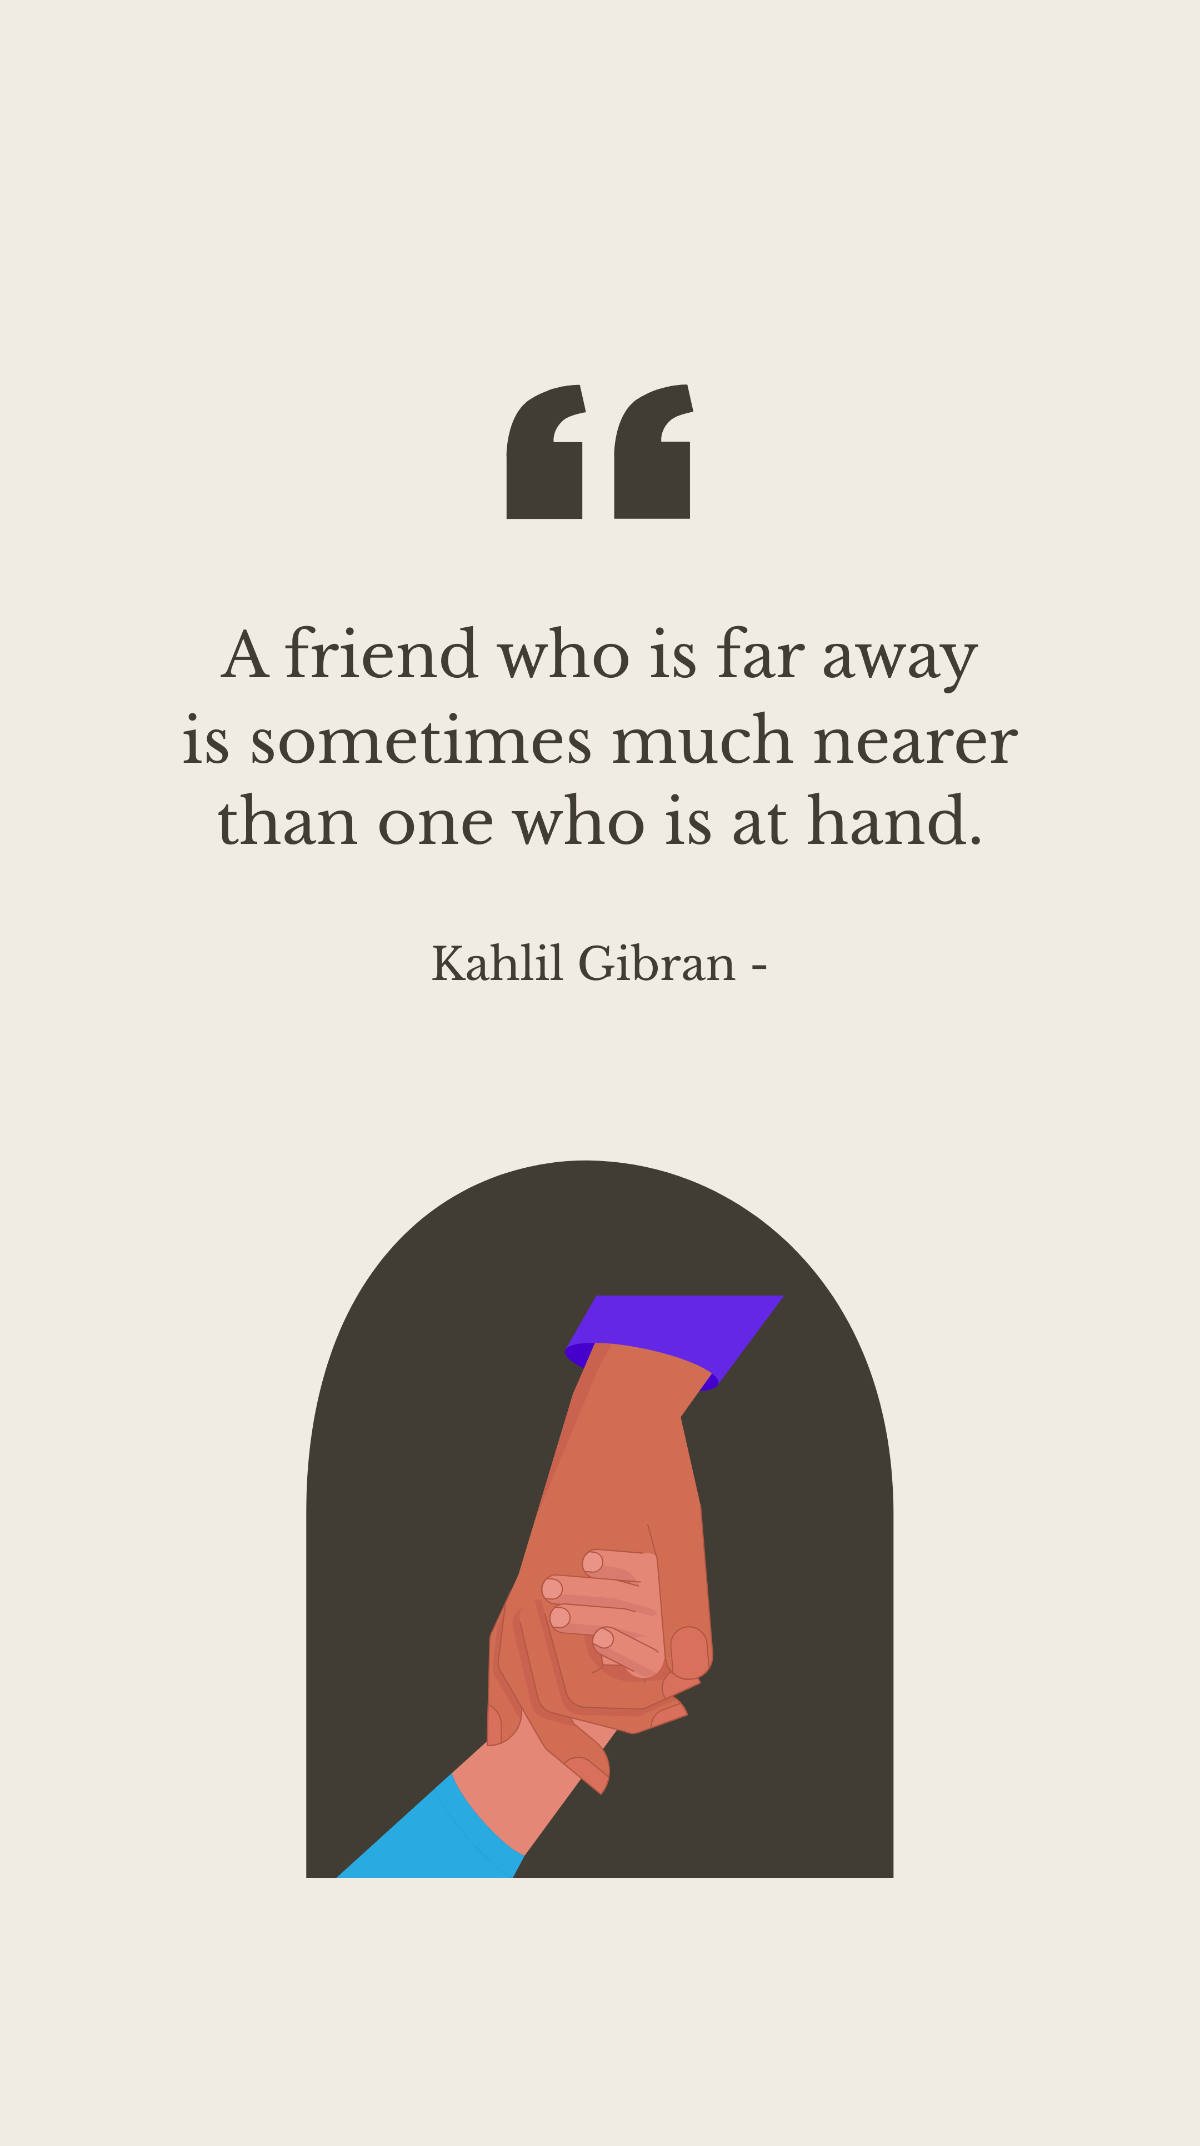 Kahlil Gibran - A friend who is far away is sometimes much nearer than one who is at hand. Template